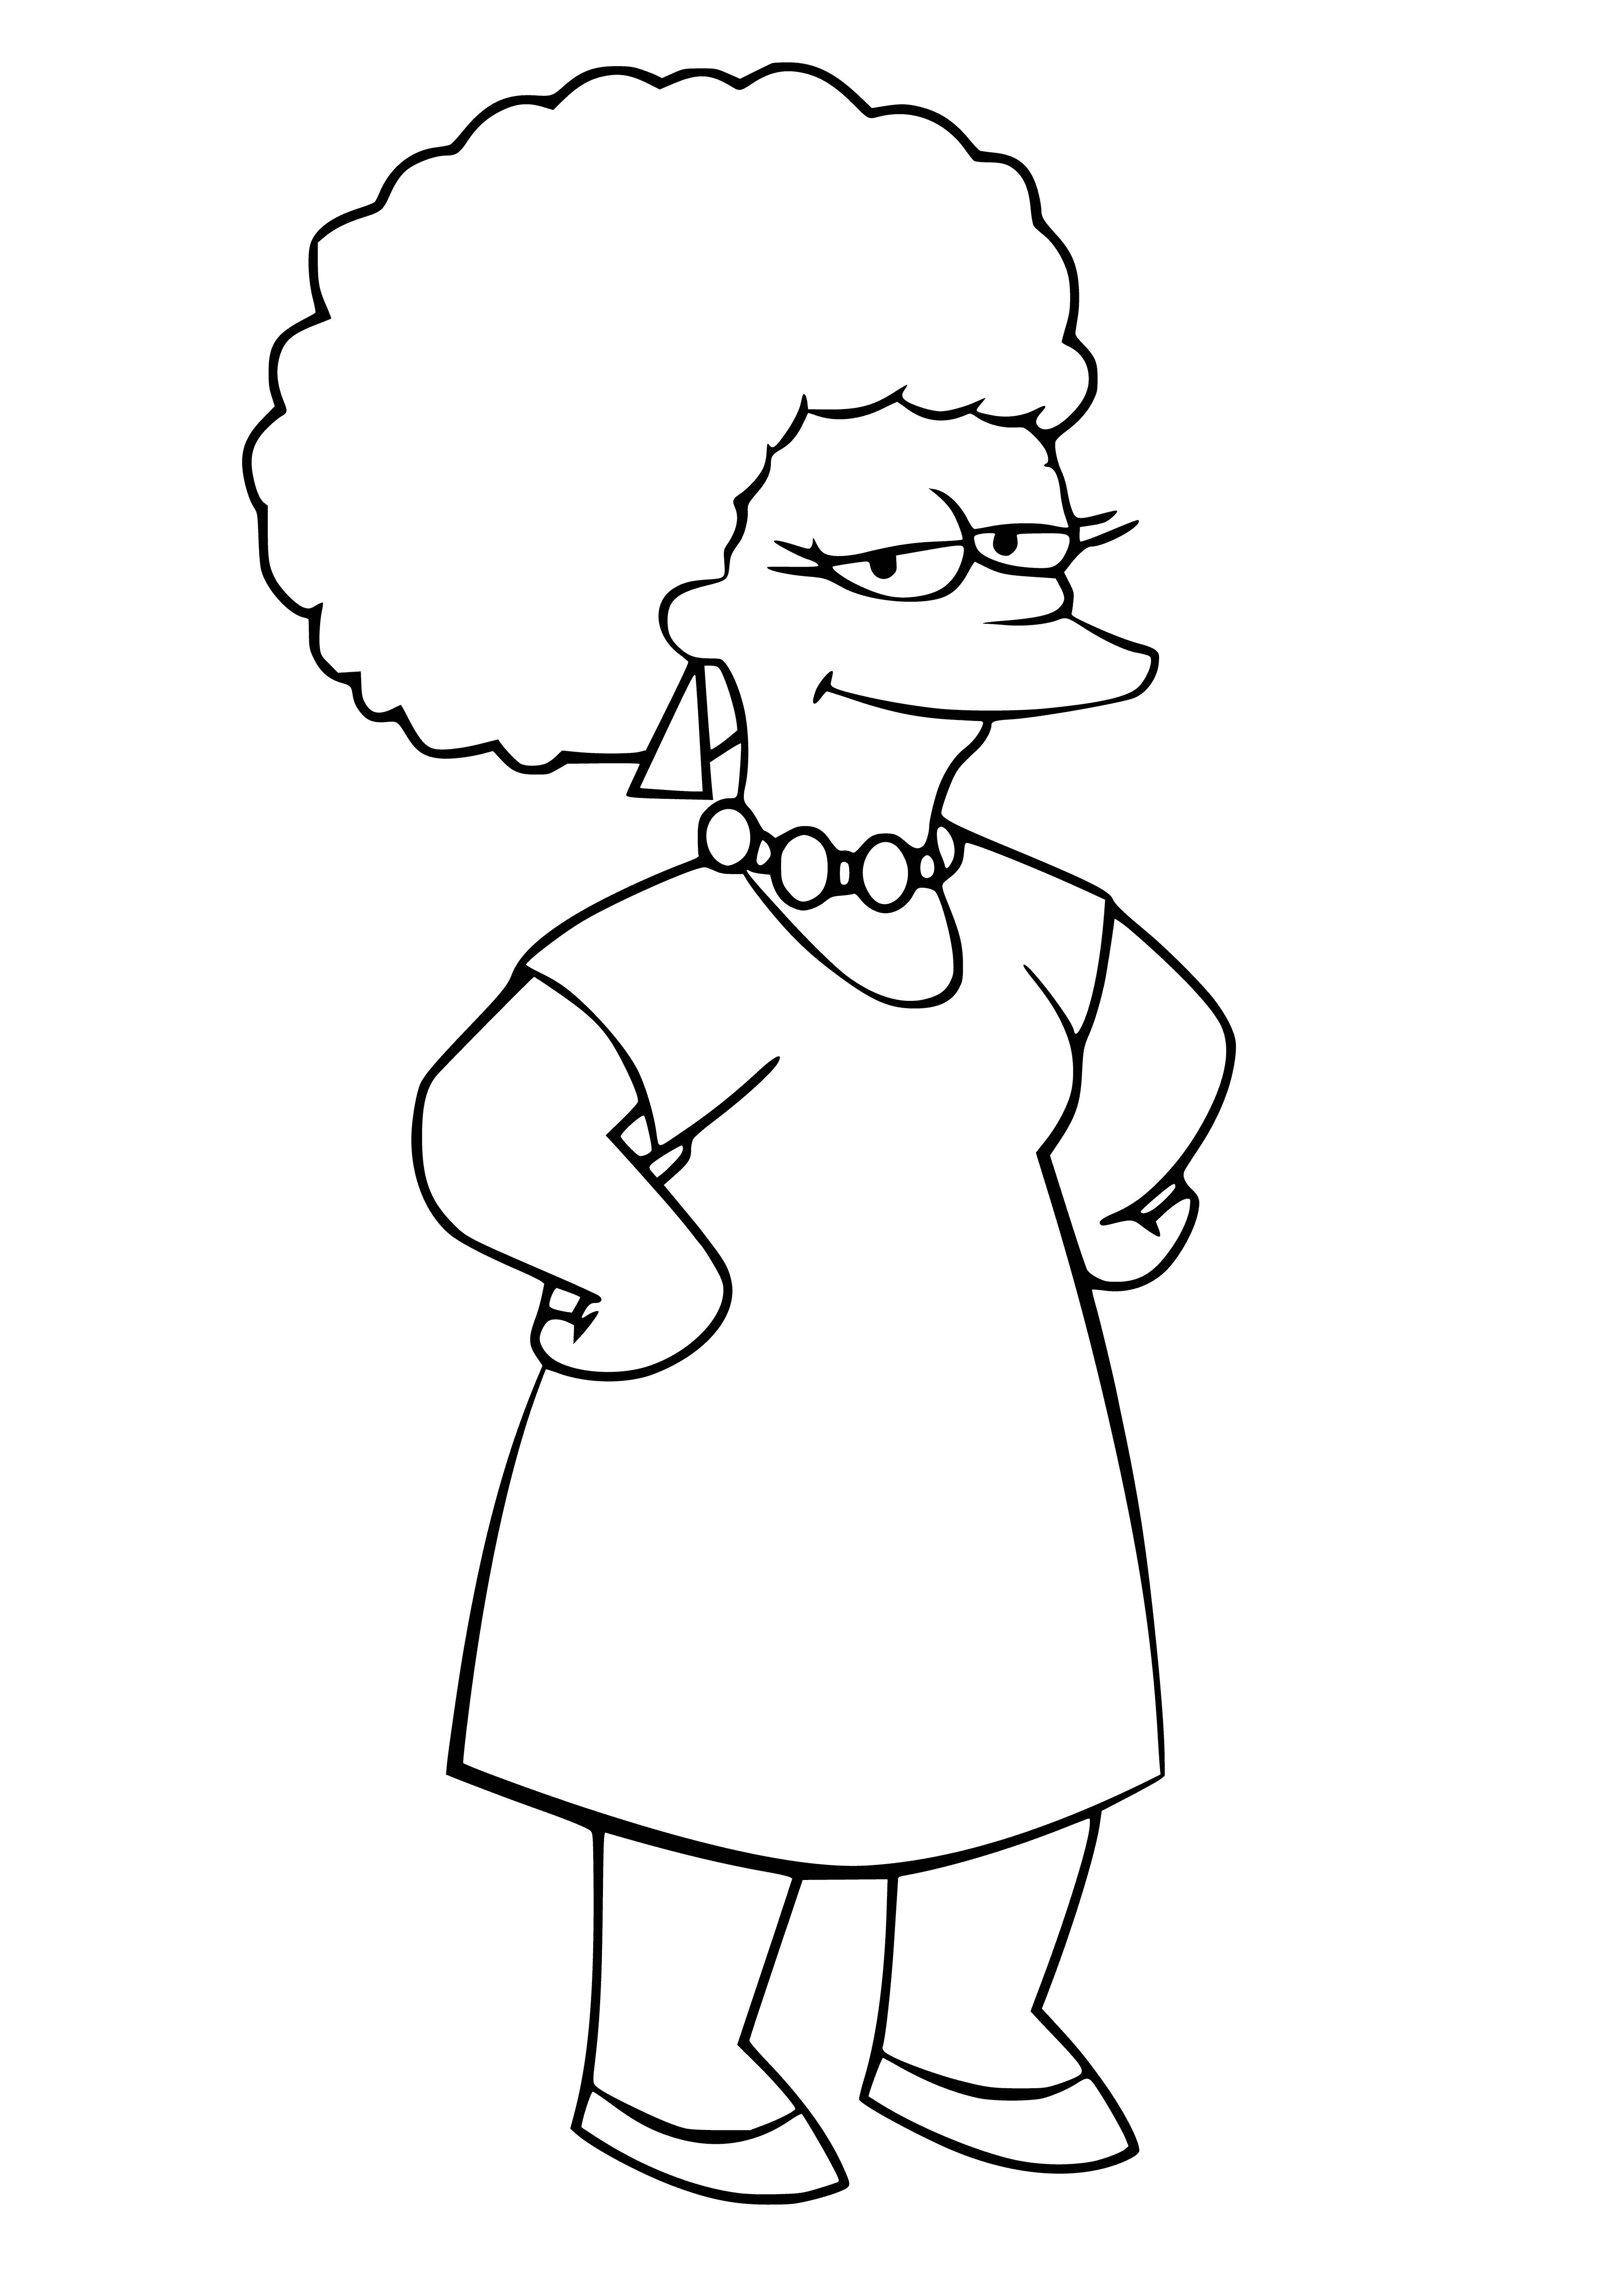 coloring page: Marge has an older sister Patty who's a blue-haired, overweight, chain-smoking lesbian.